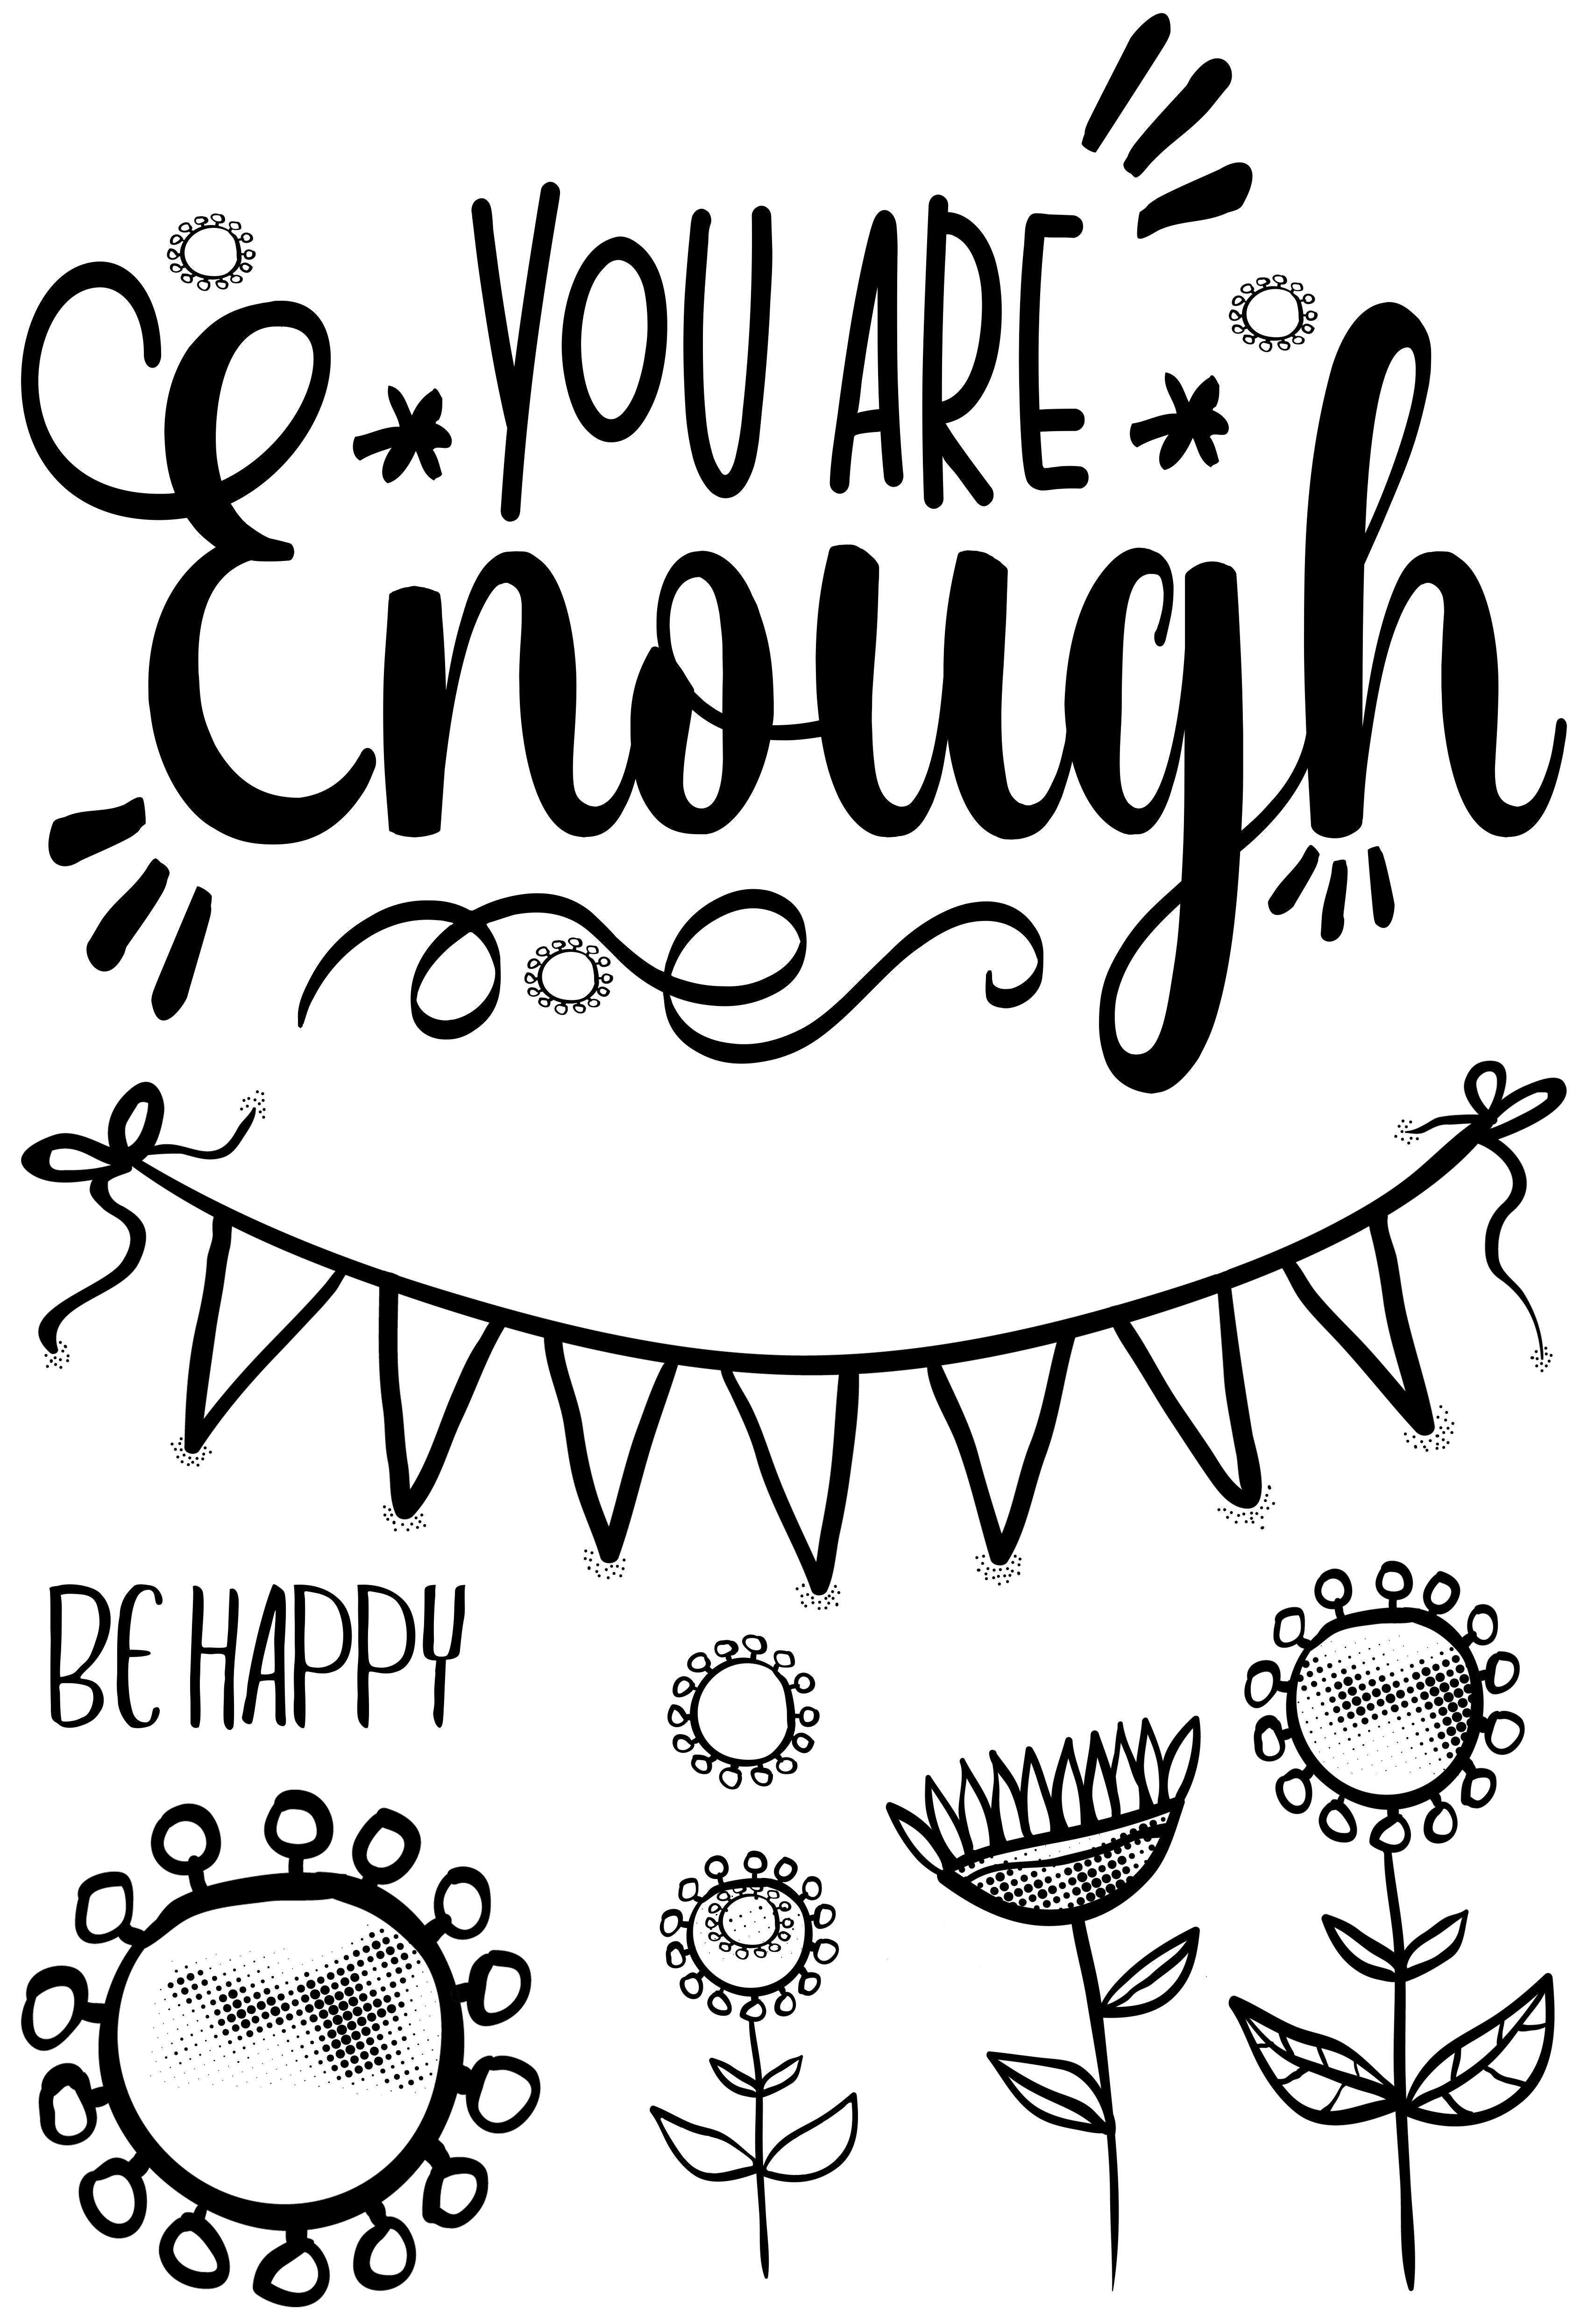 Creative Expressions Designer Boutique Enough 6 in x 4 in Stamp Set